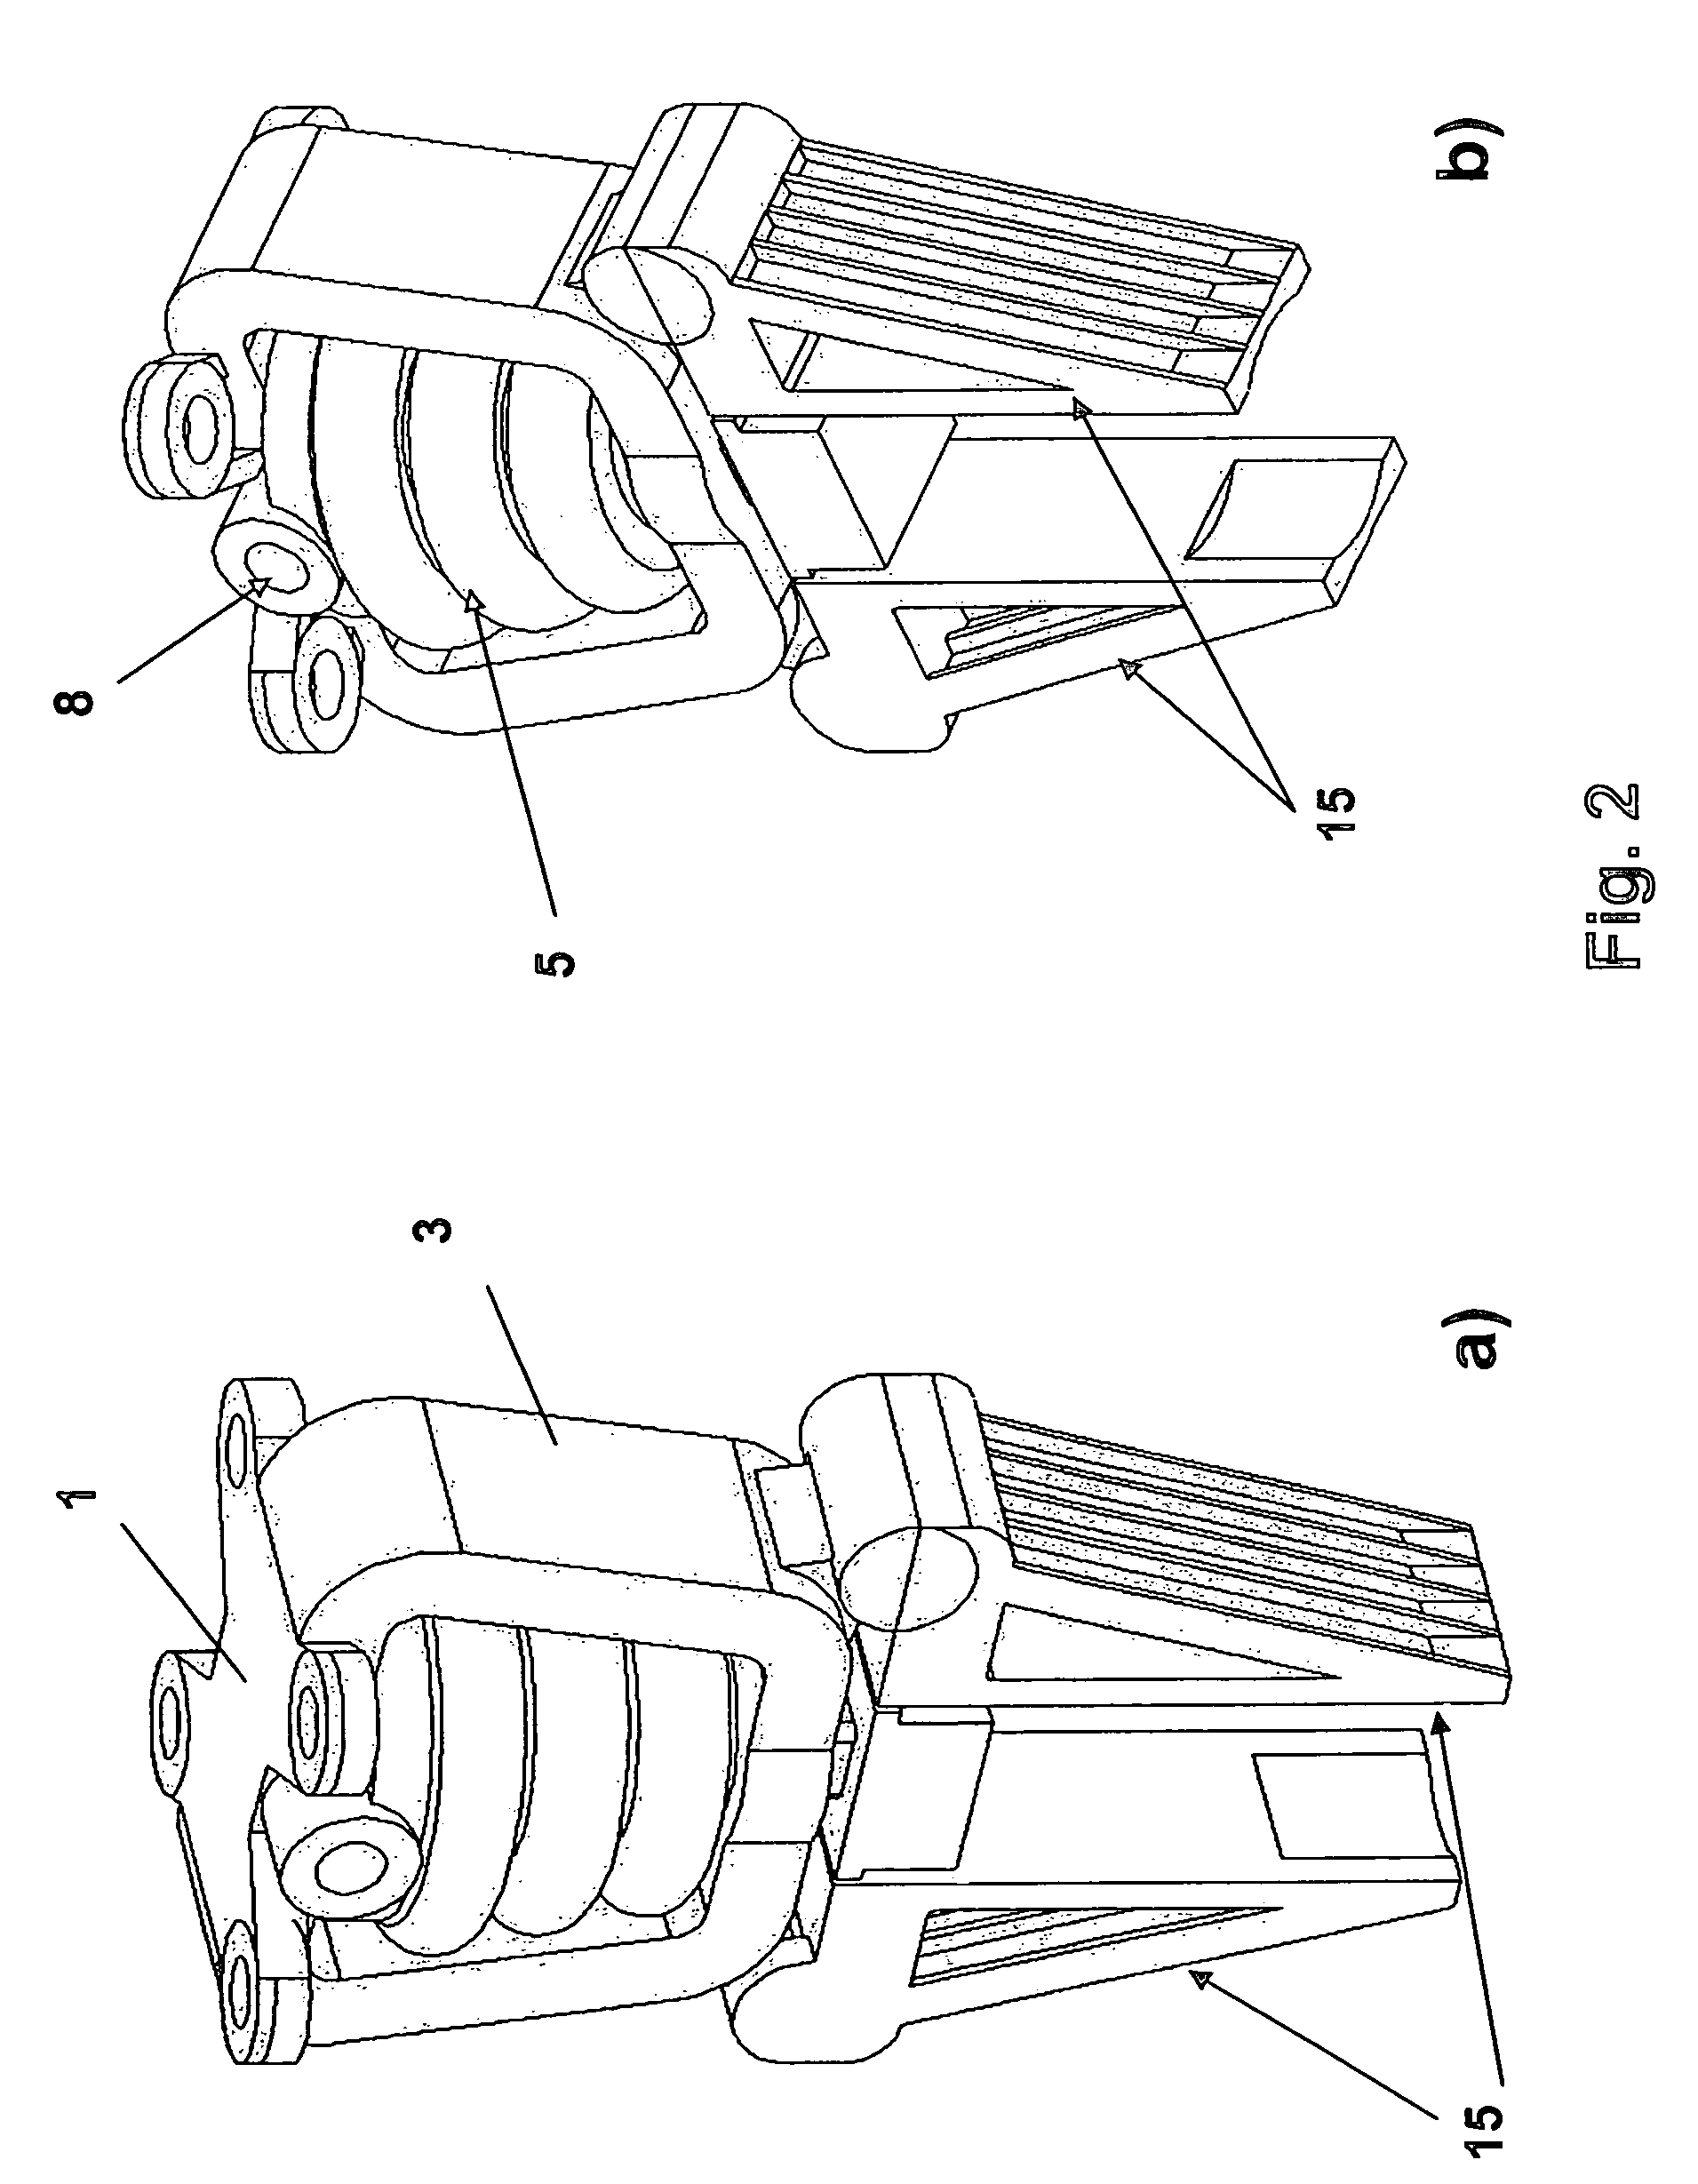 Robot gripper and method for its manufacture